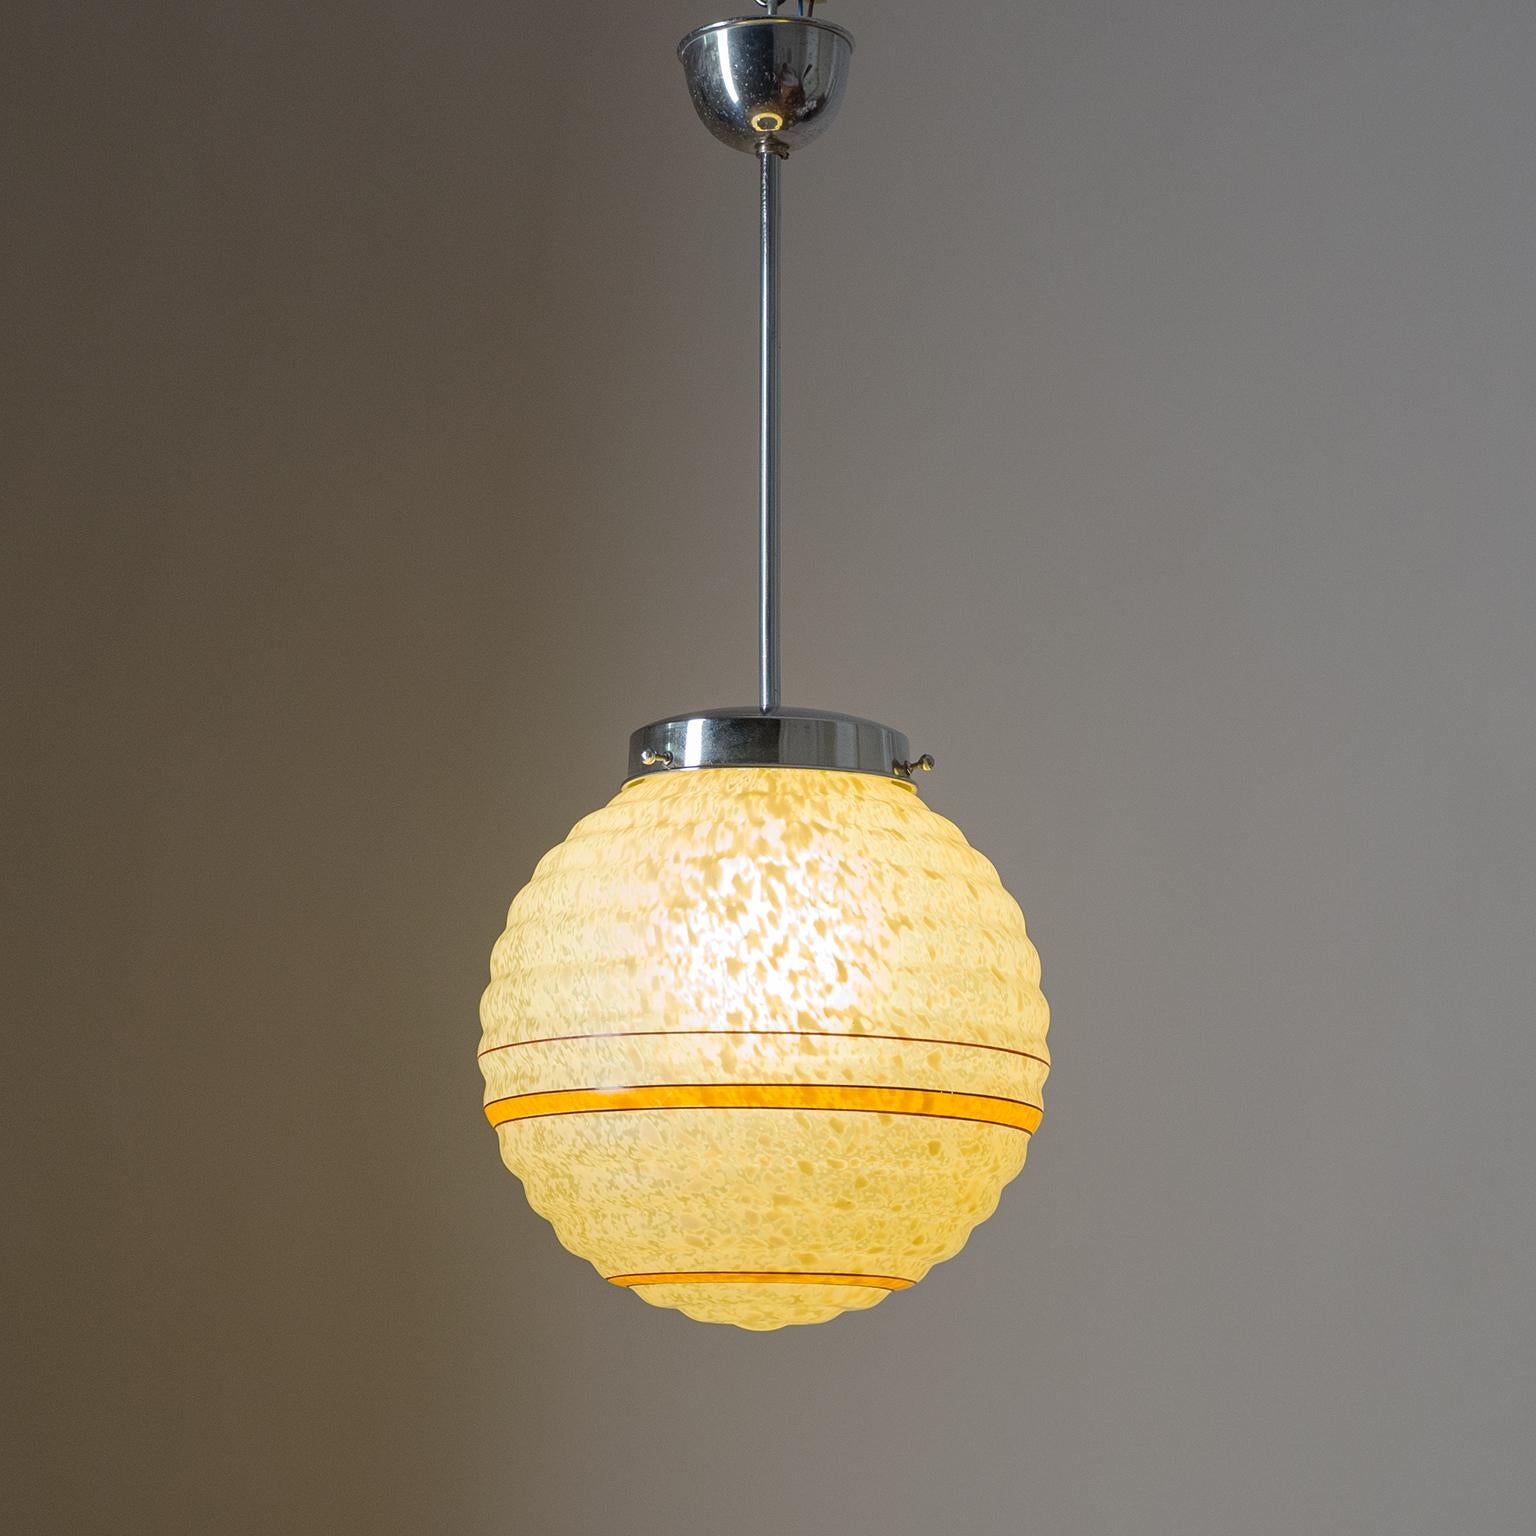 Art Deco pendant or lantern with a ribbed glass globe and chrome hardware. The ribbed globe is made of mottled amber glass with a satin finish and painted 'Saturn' rings. Fine original condition with one original brass and ceramic E27 socket and new